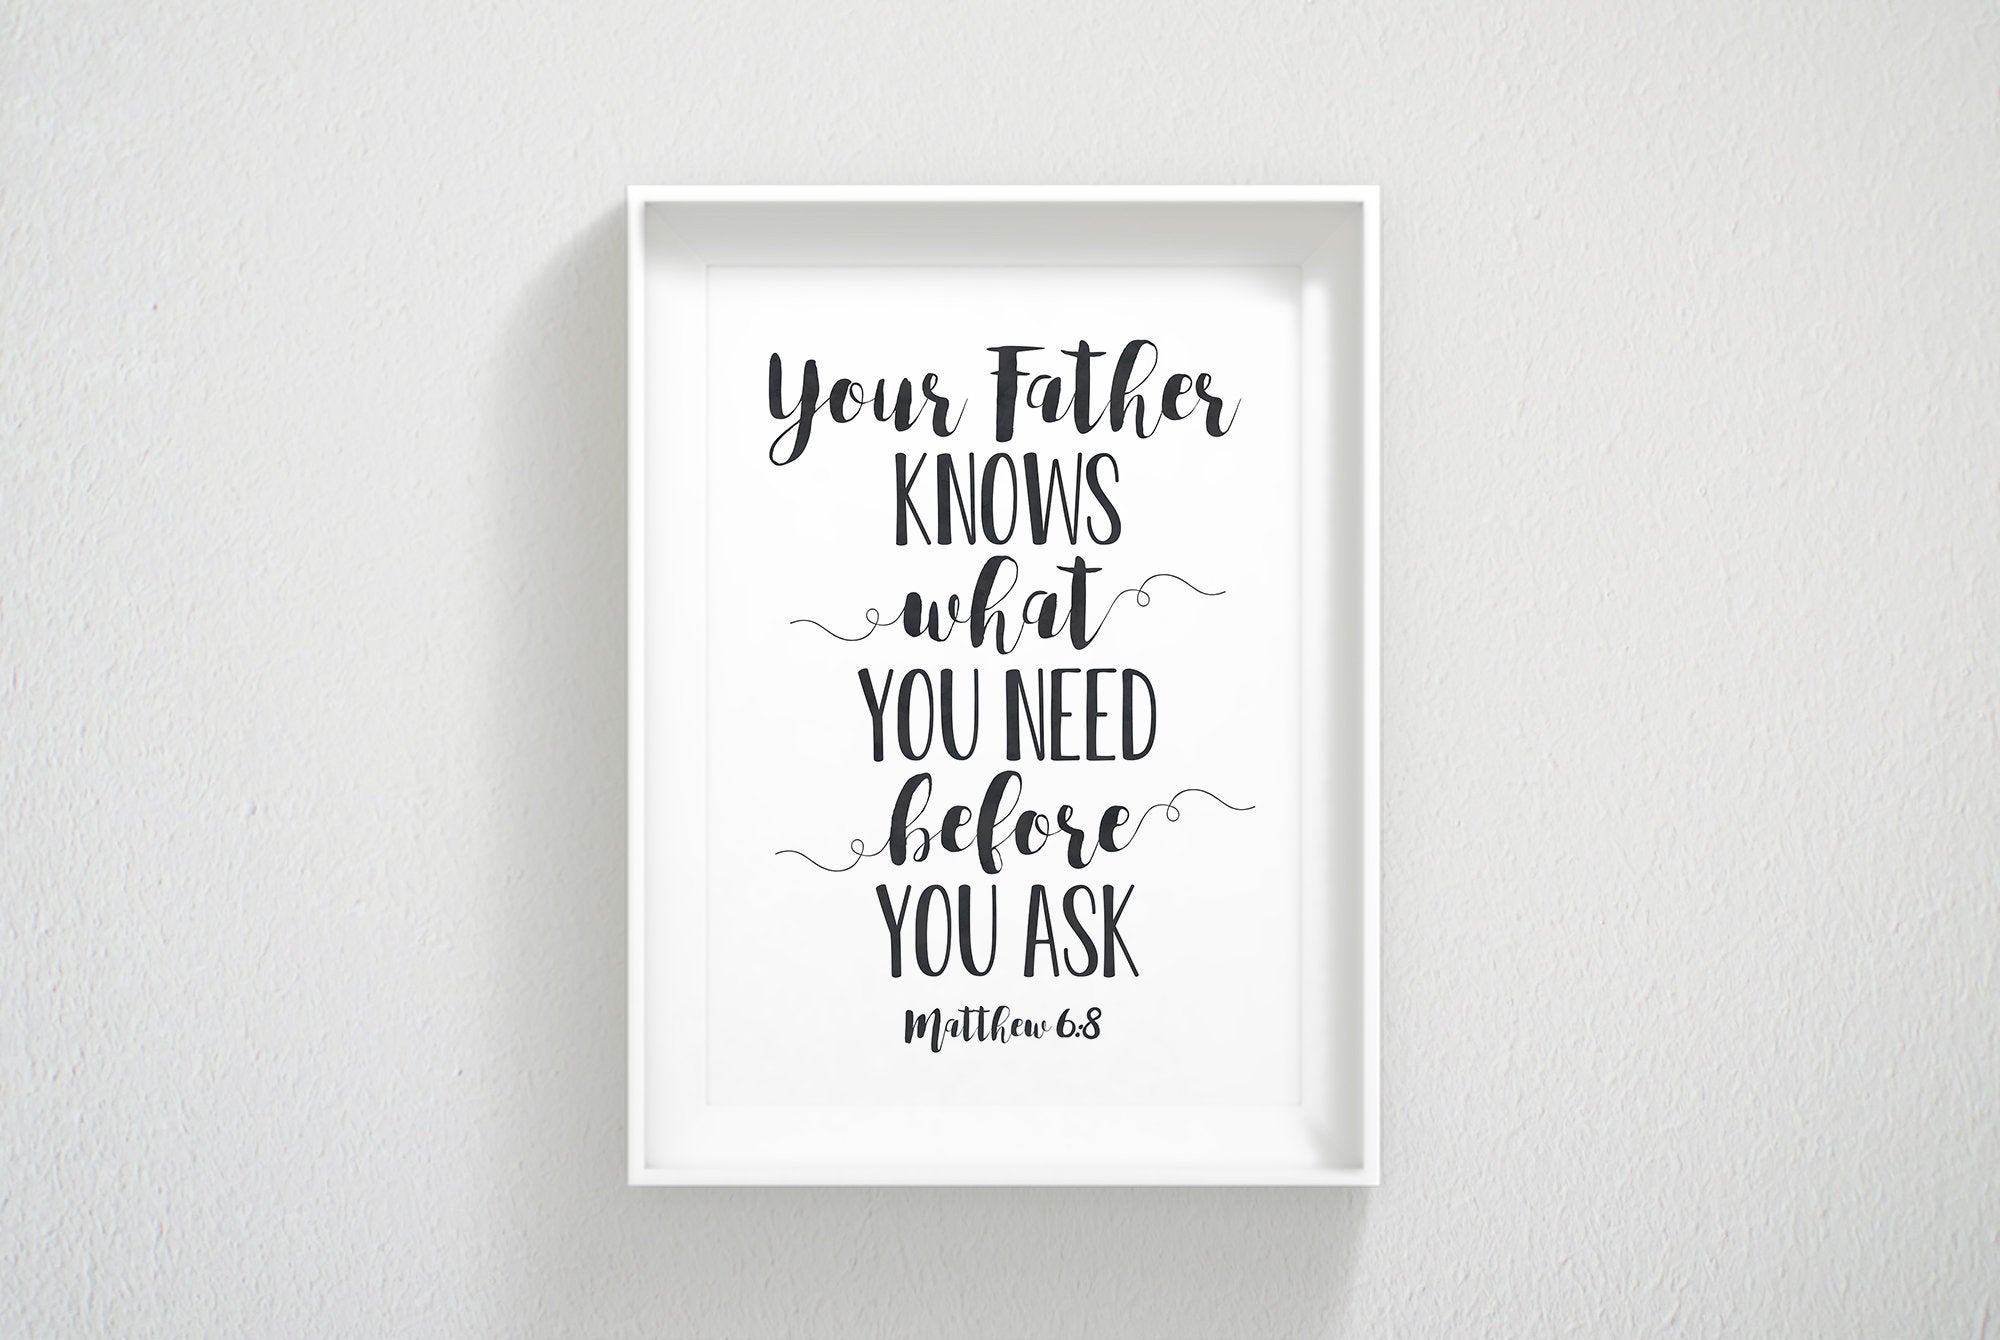 Your Father Knows What You Need, Matthew 6:8, Bible Verse Printable, Scripture Wall Art